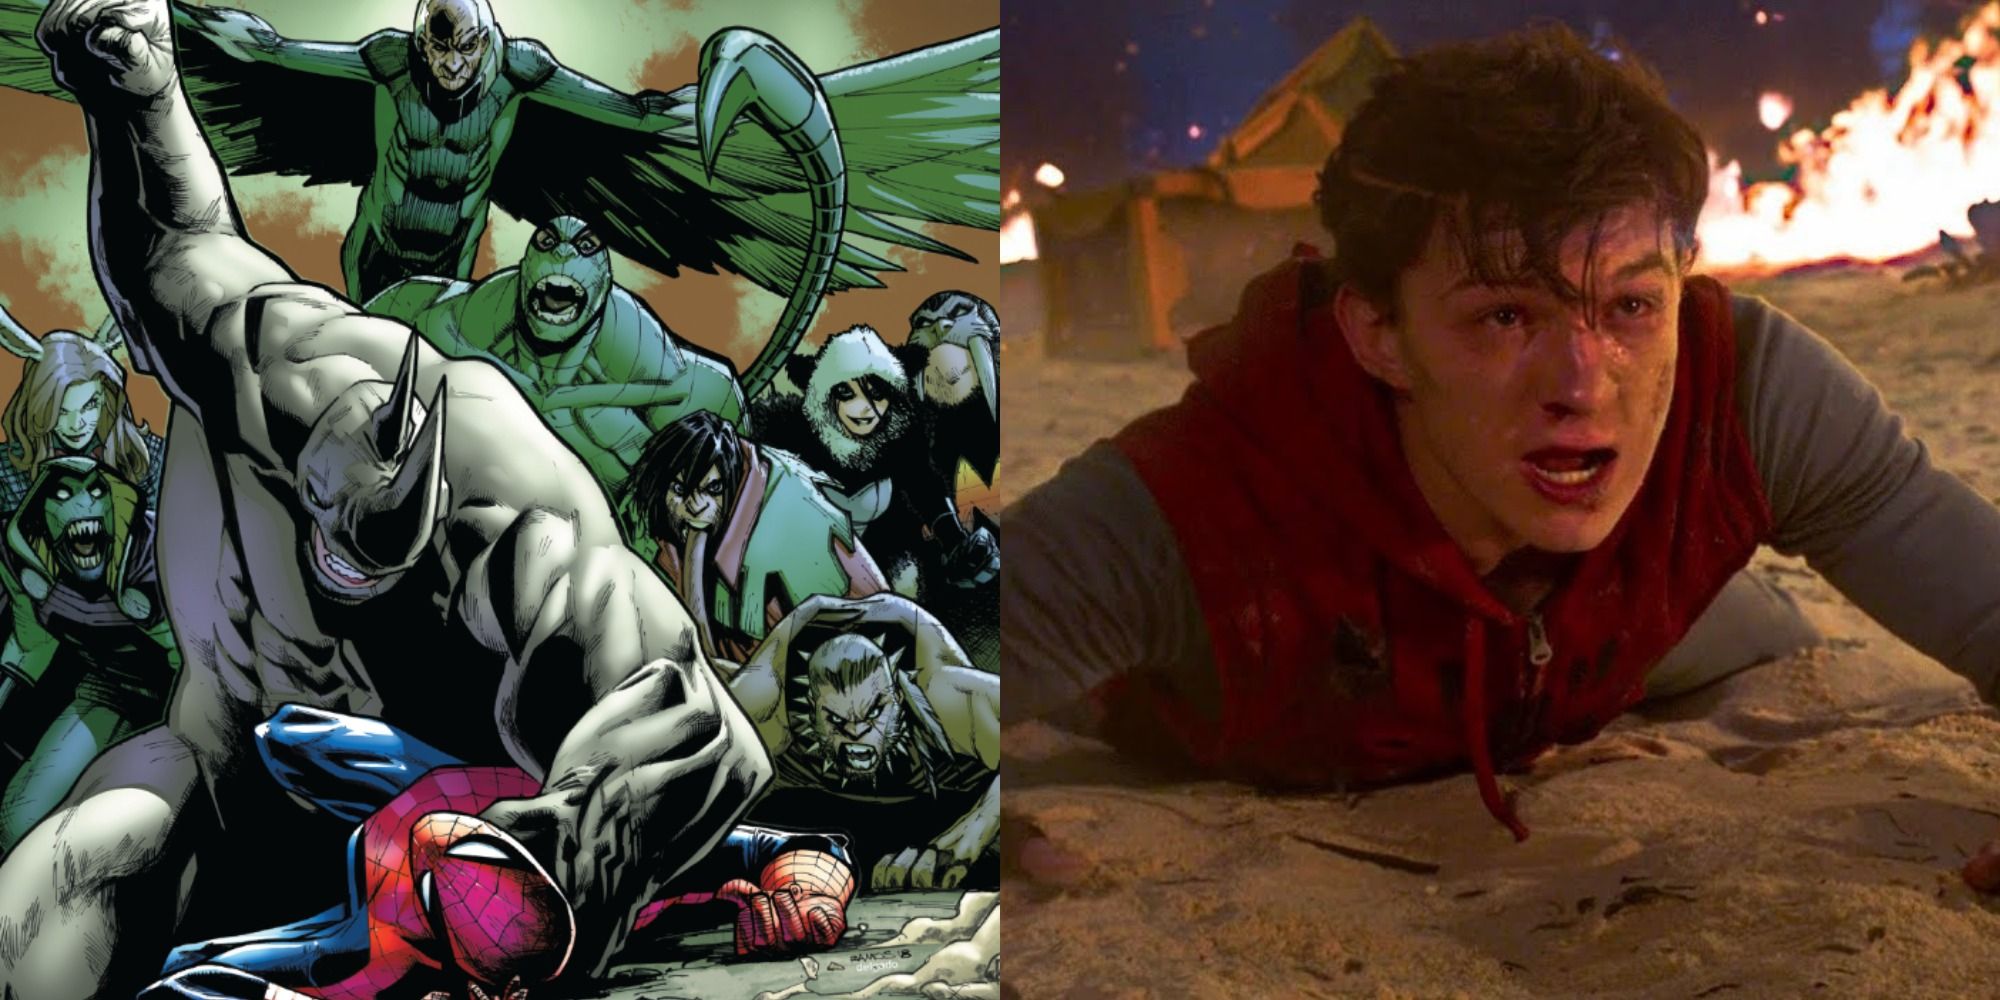 Split image showing the villains subduing Spider-Man in the comics, and Spider-Man on the ground in Homecoming